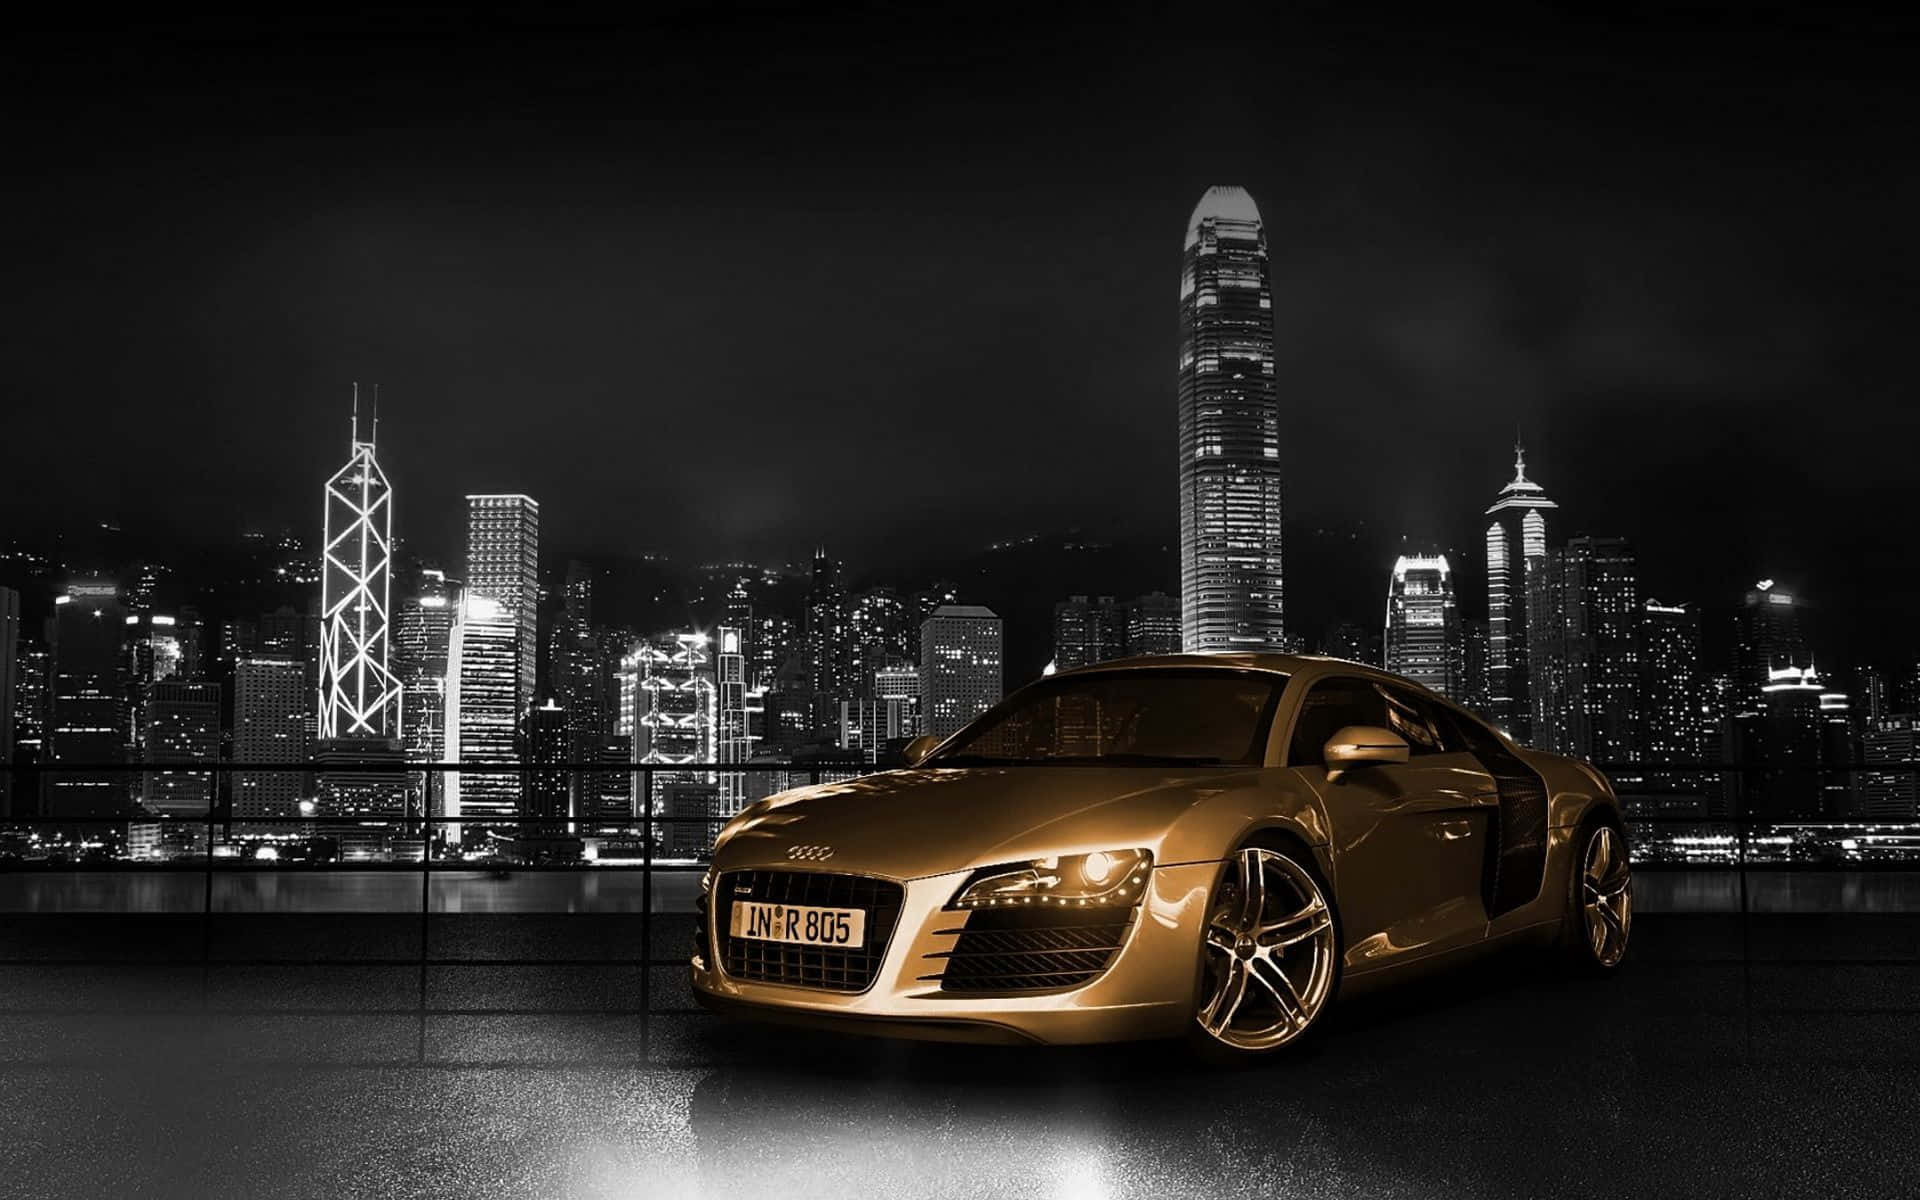 Gold Cars In Bw Cityscape